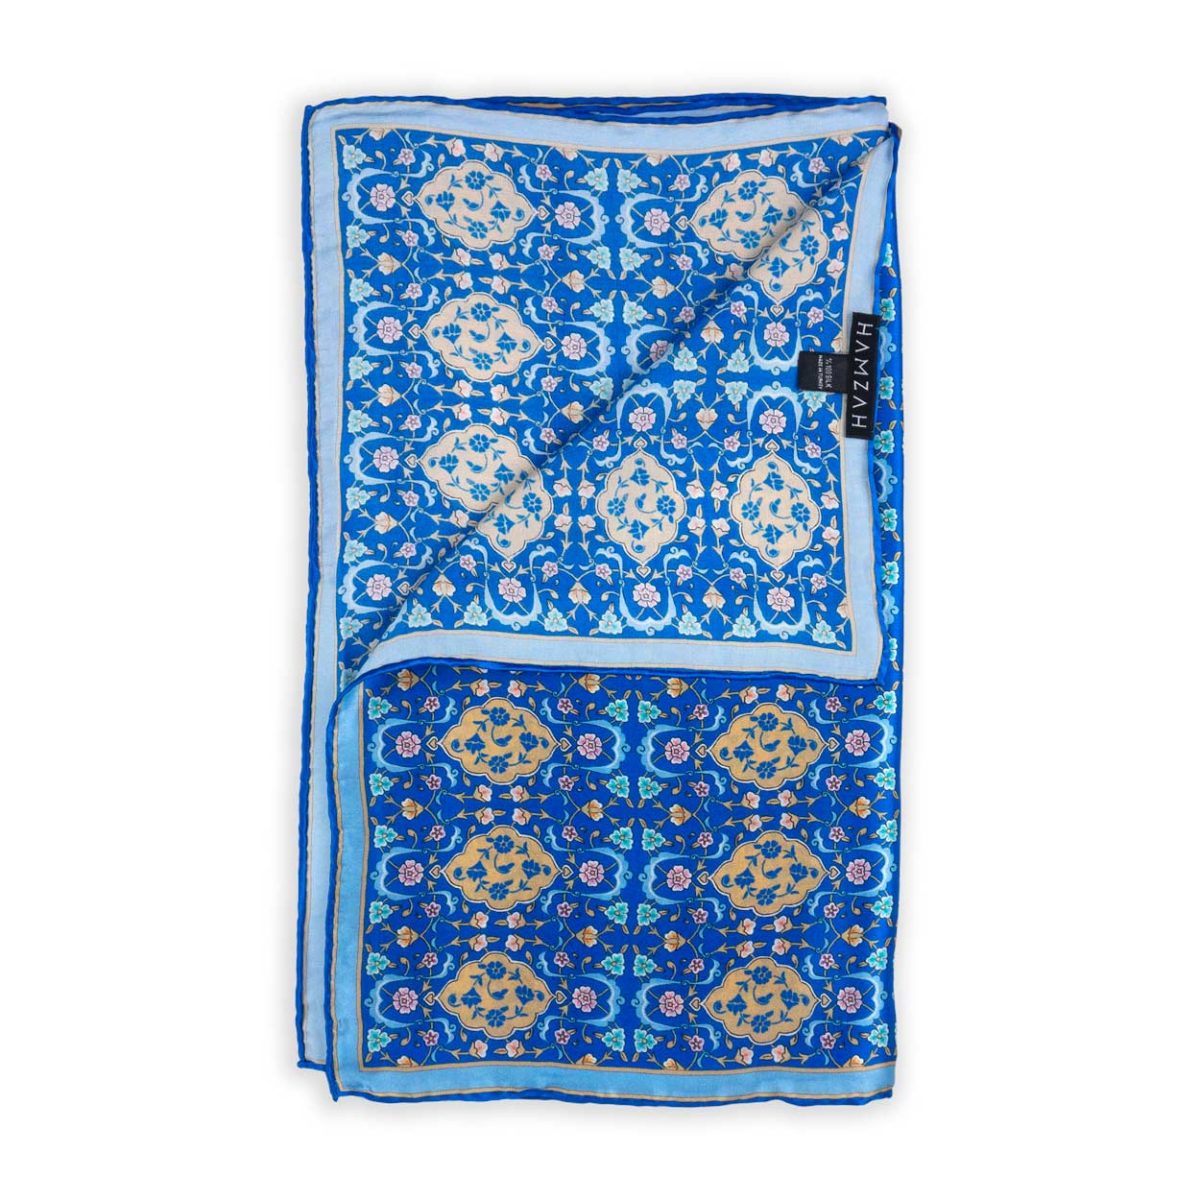 Turkish art inspired with blue floral print